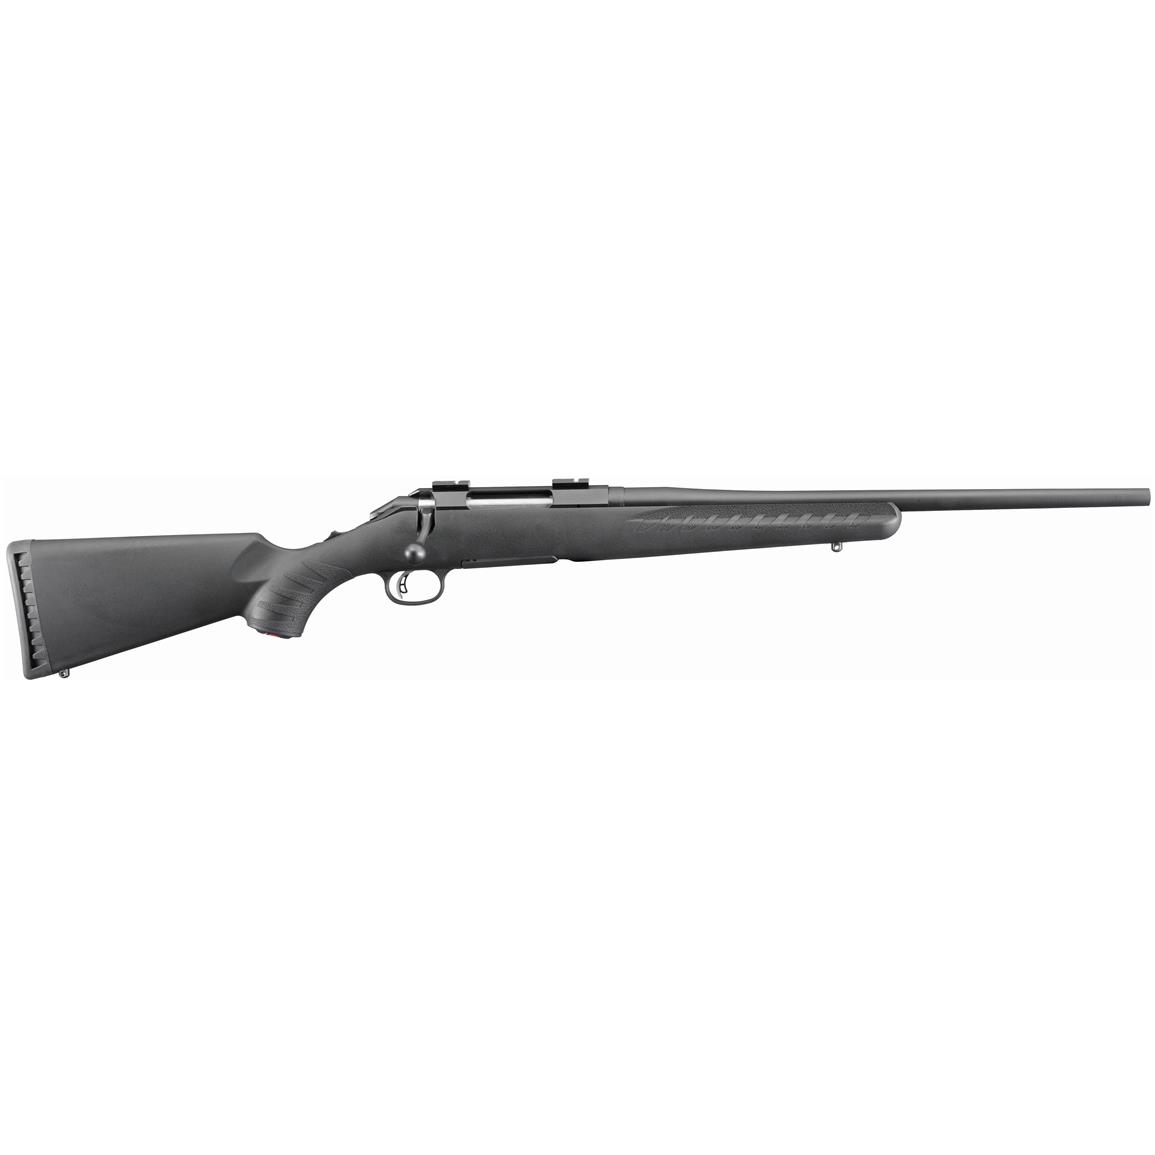 Ruger American Rifle Compact, Bolt Action, .308 Winchester, 18" Barrel, 4 Rounds